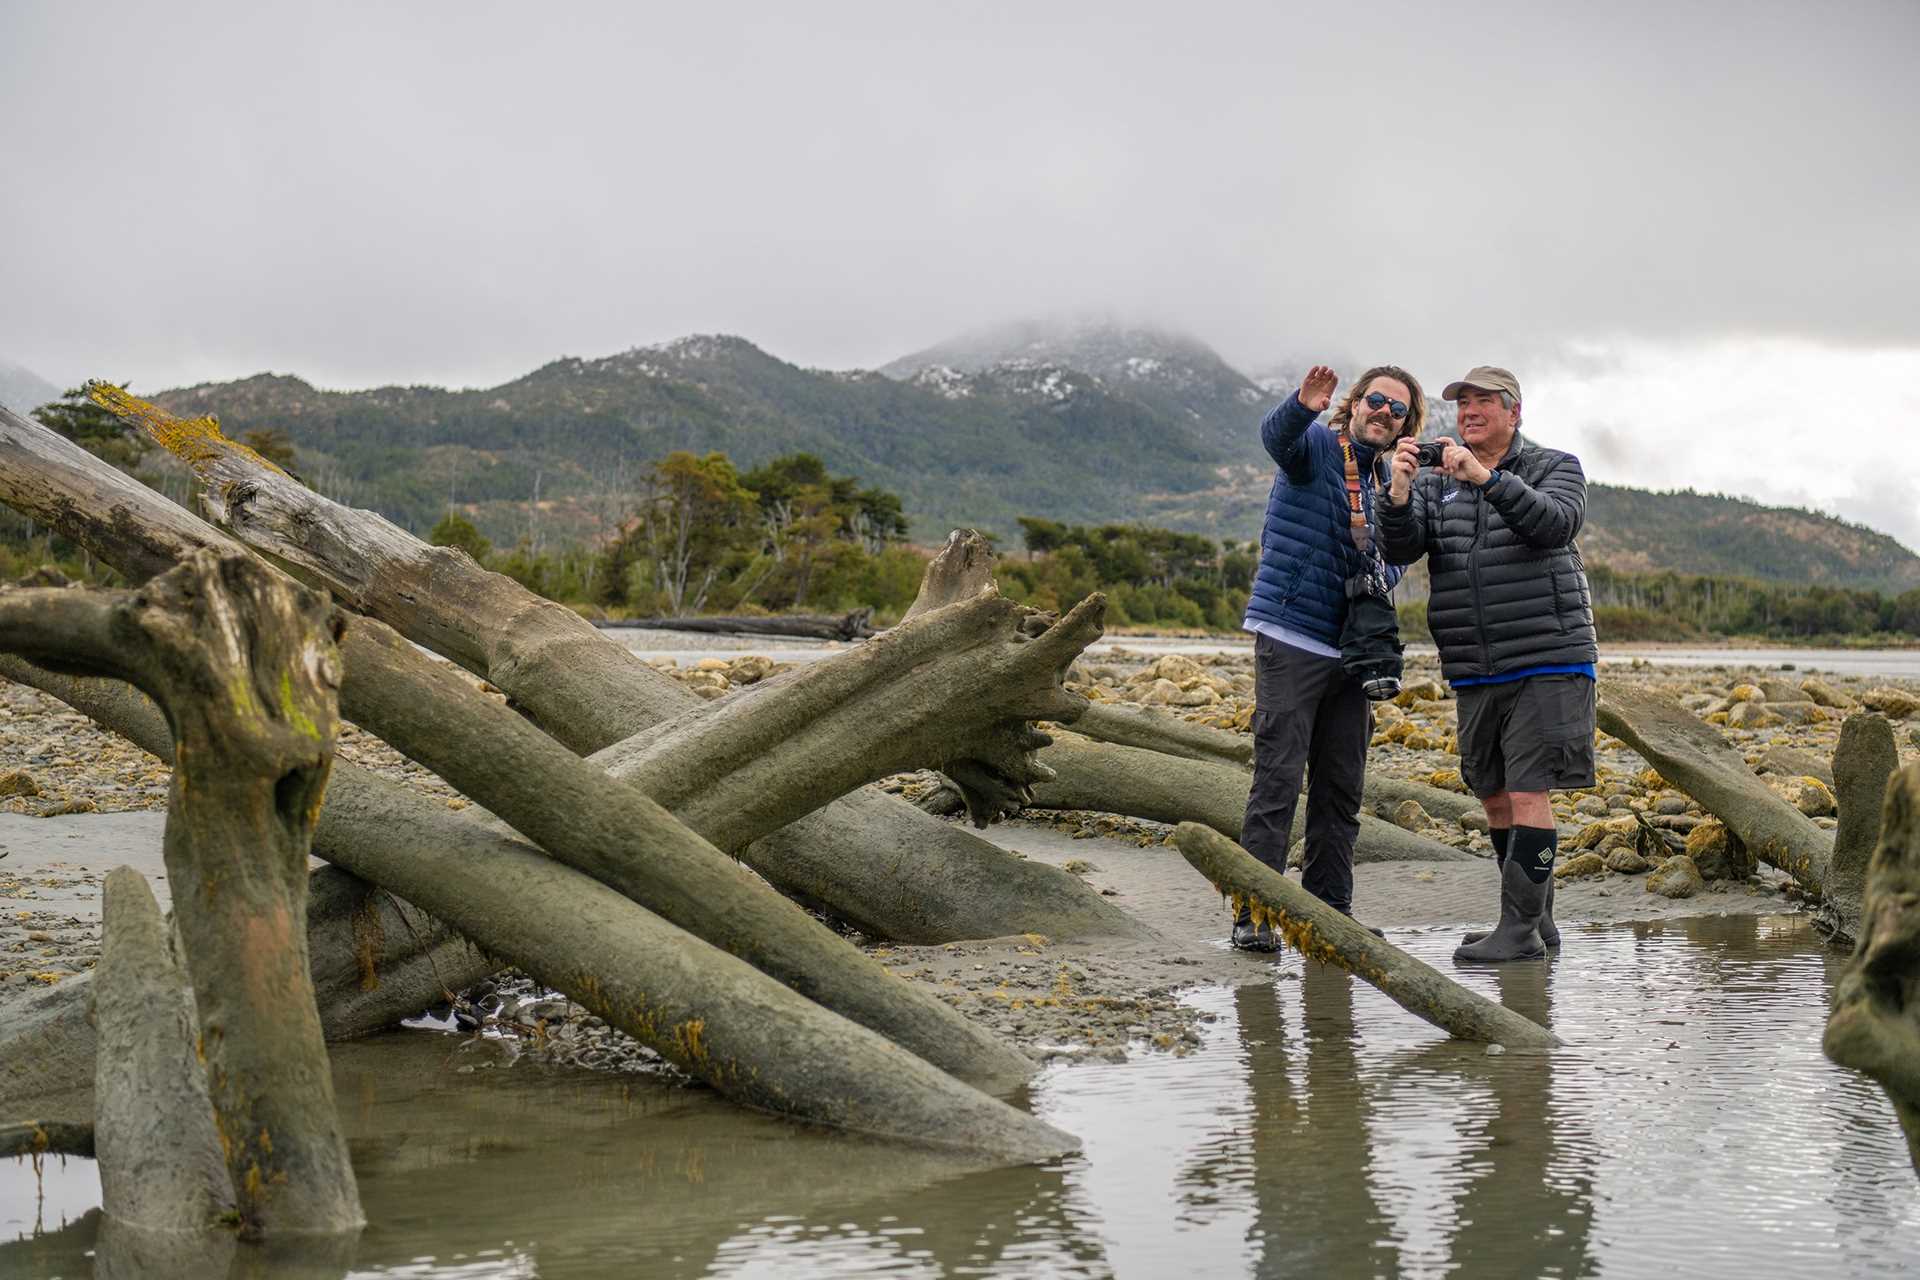 Certified photography instructor Jayden O'Neill helps a male guest photograph Jackson Bay, Karukina Natural Park, Patagonia.